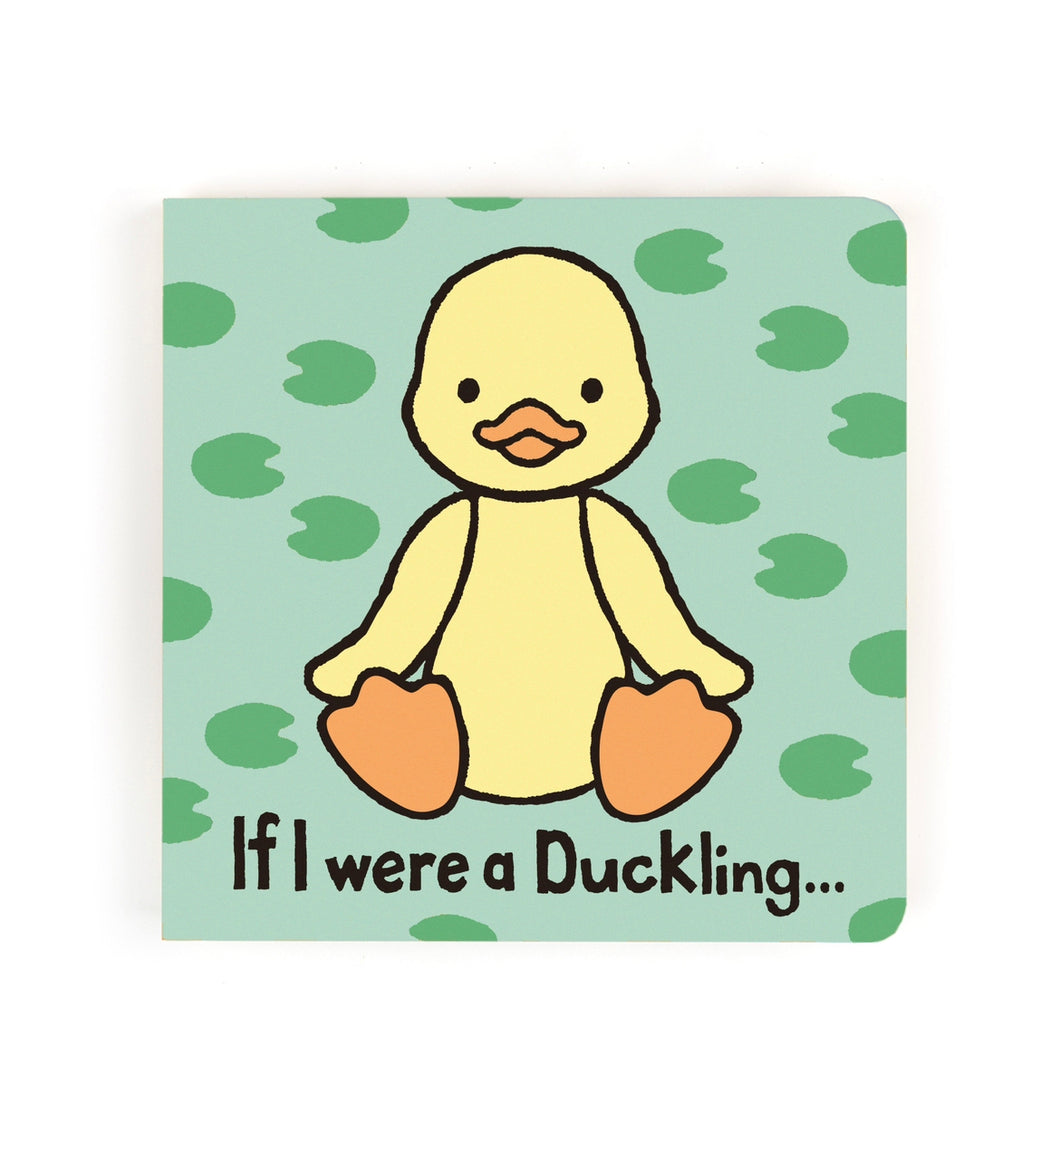 Book - If I were a Duckling